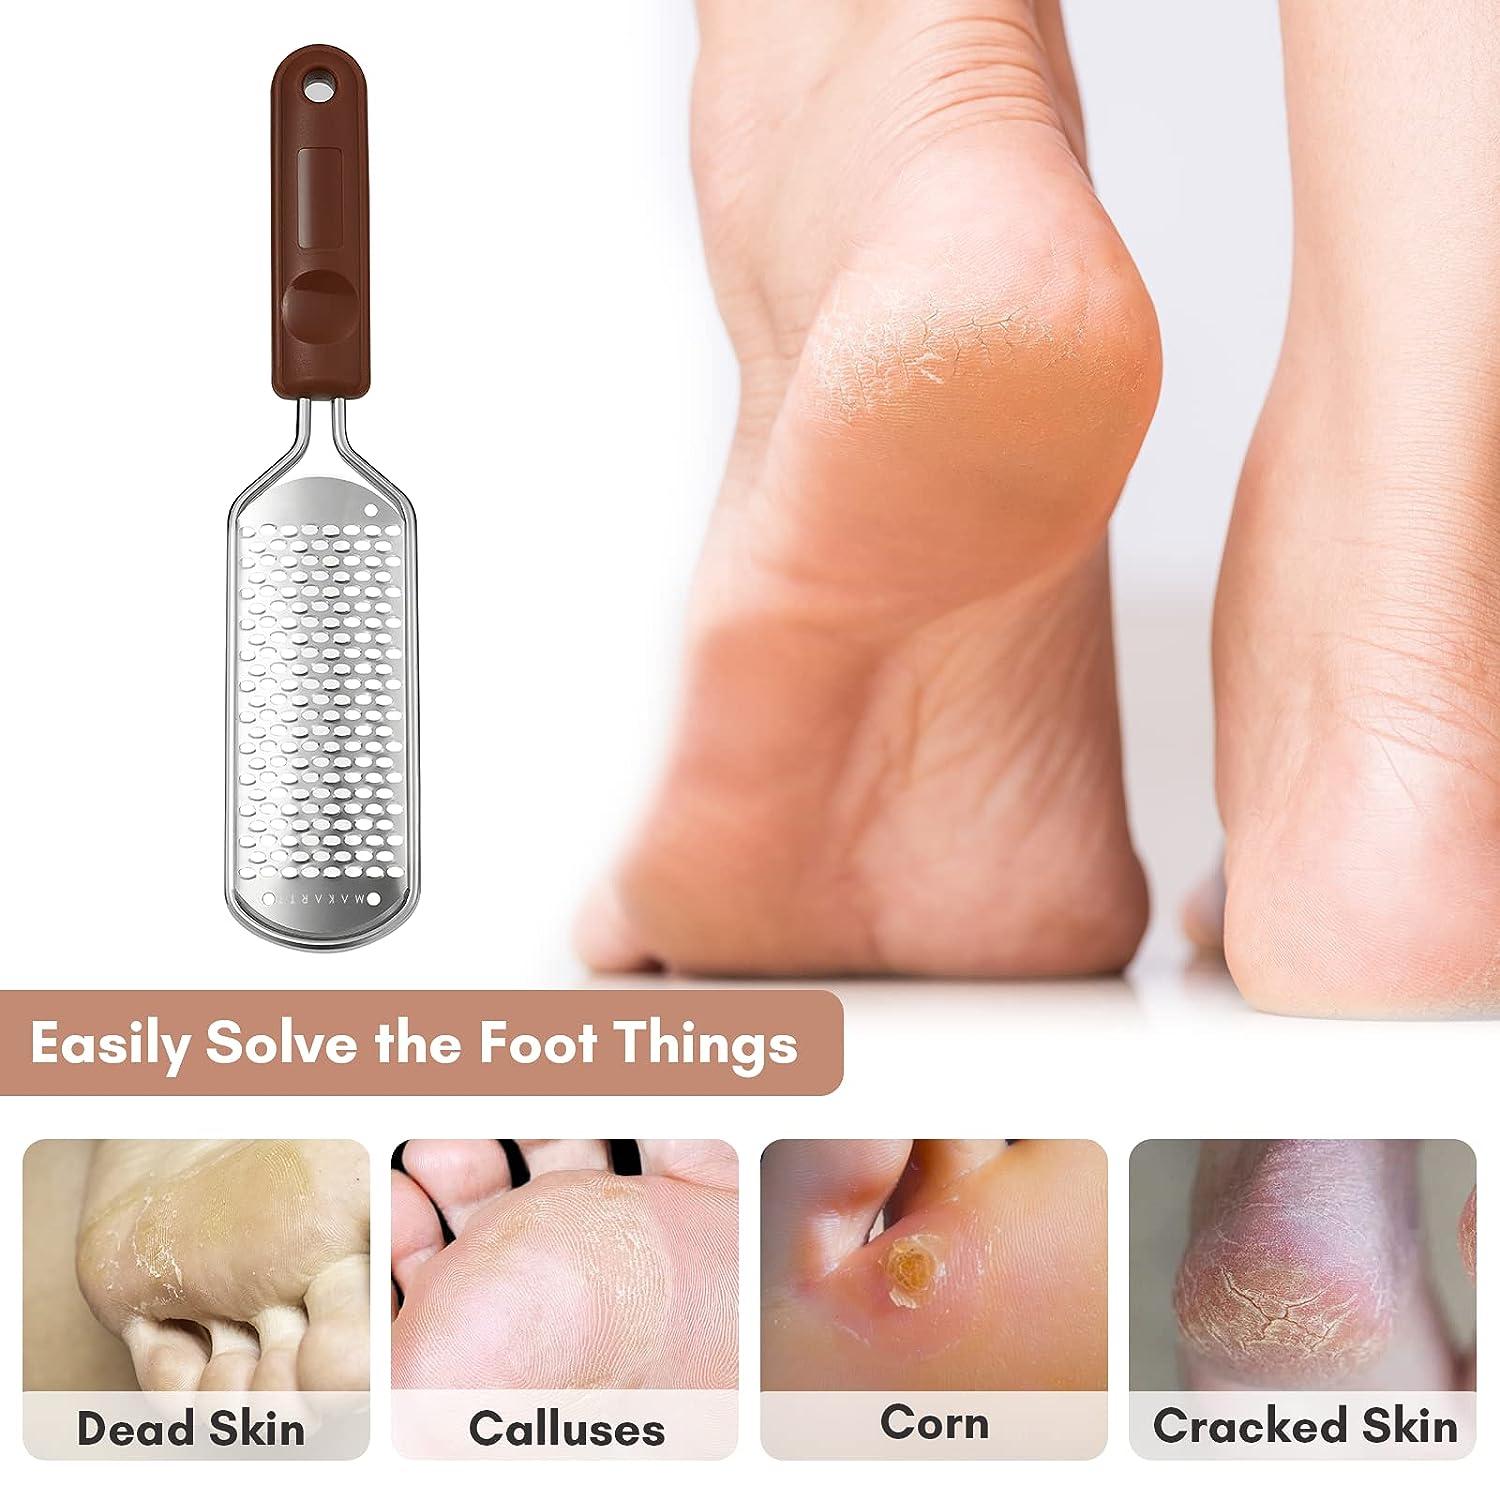 Foot File for Dead Skin, Callus Remover for Feet, Metal Foot Scrubber for  Cracked Heels, Professional